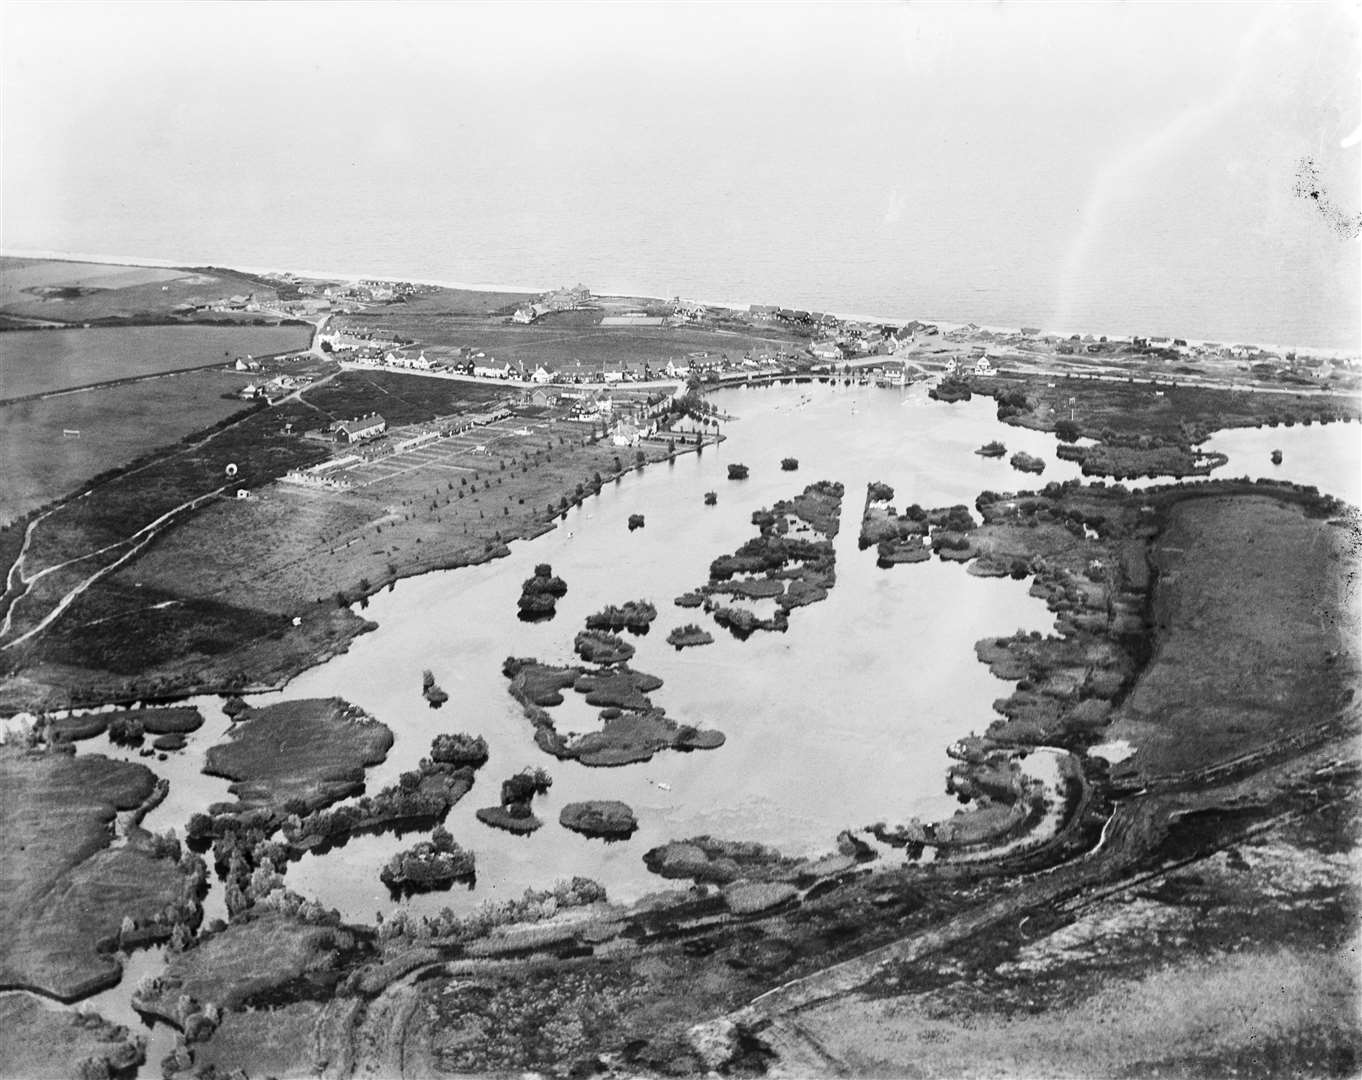 A bird’s eye view of Thorpeness Meare in Suffolk (Historic England Archive/PA)